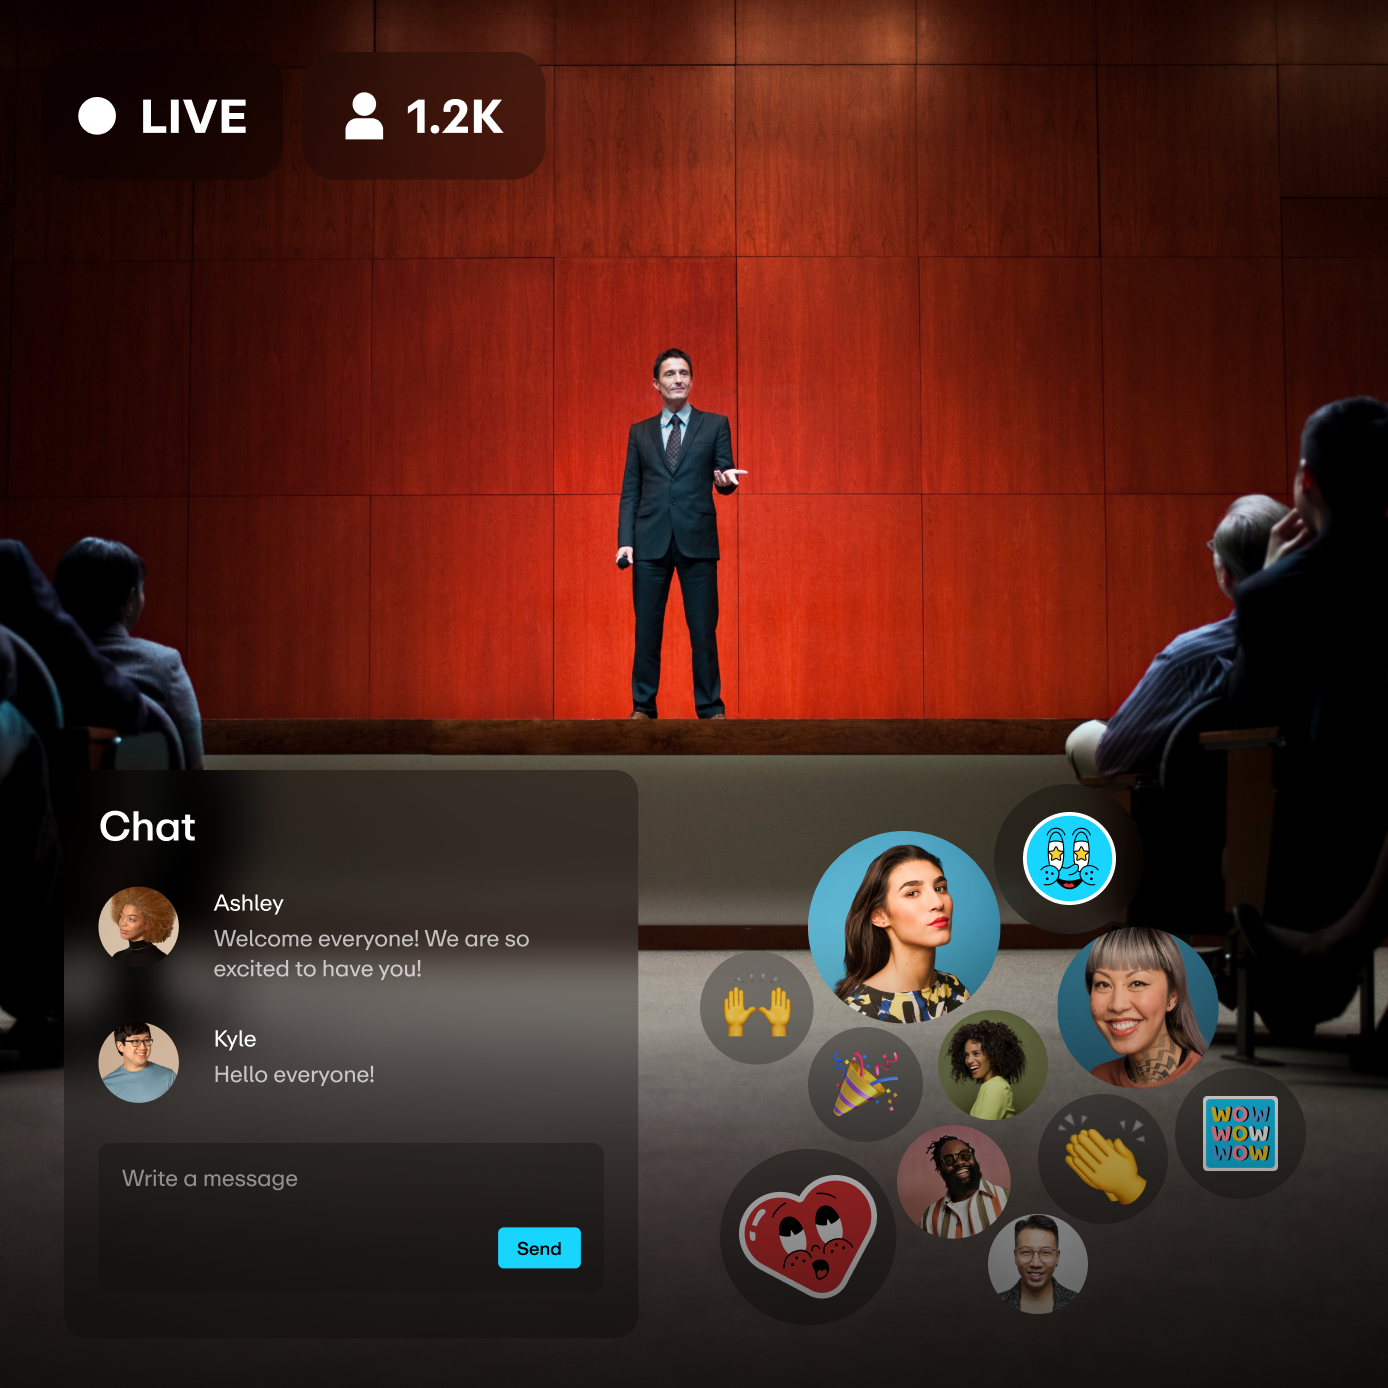 Live streaming town hall with an audience chat box